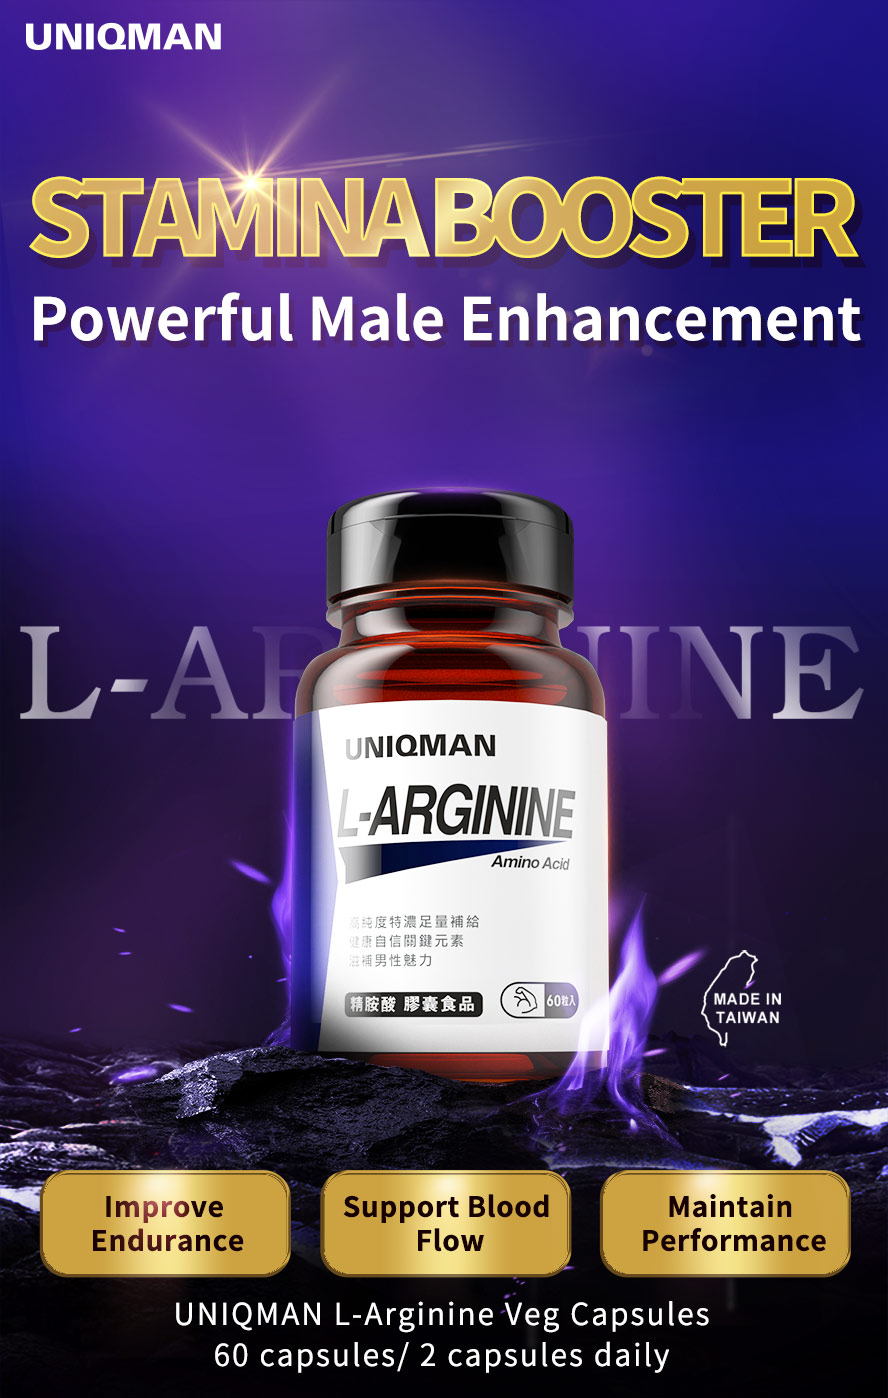 UNIQMAN L-Arginine is a stamina booster to improve endurance, support blood flow, promote congestion, and maintain long-lasting male performance